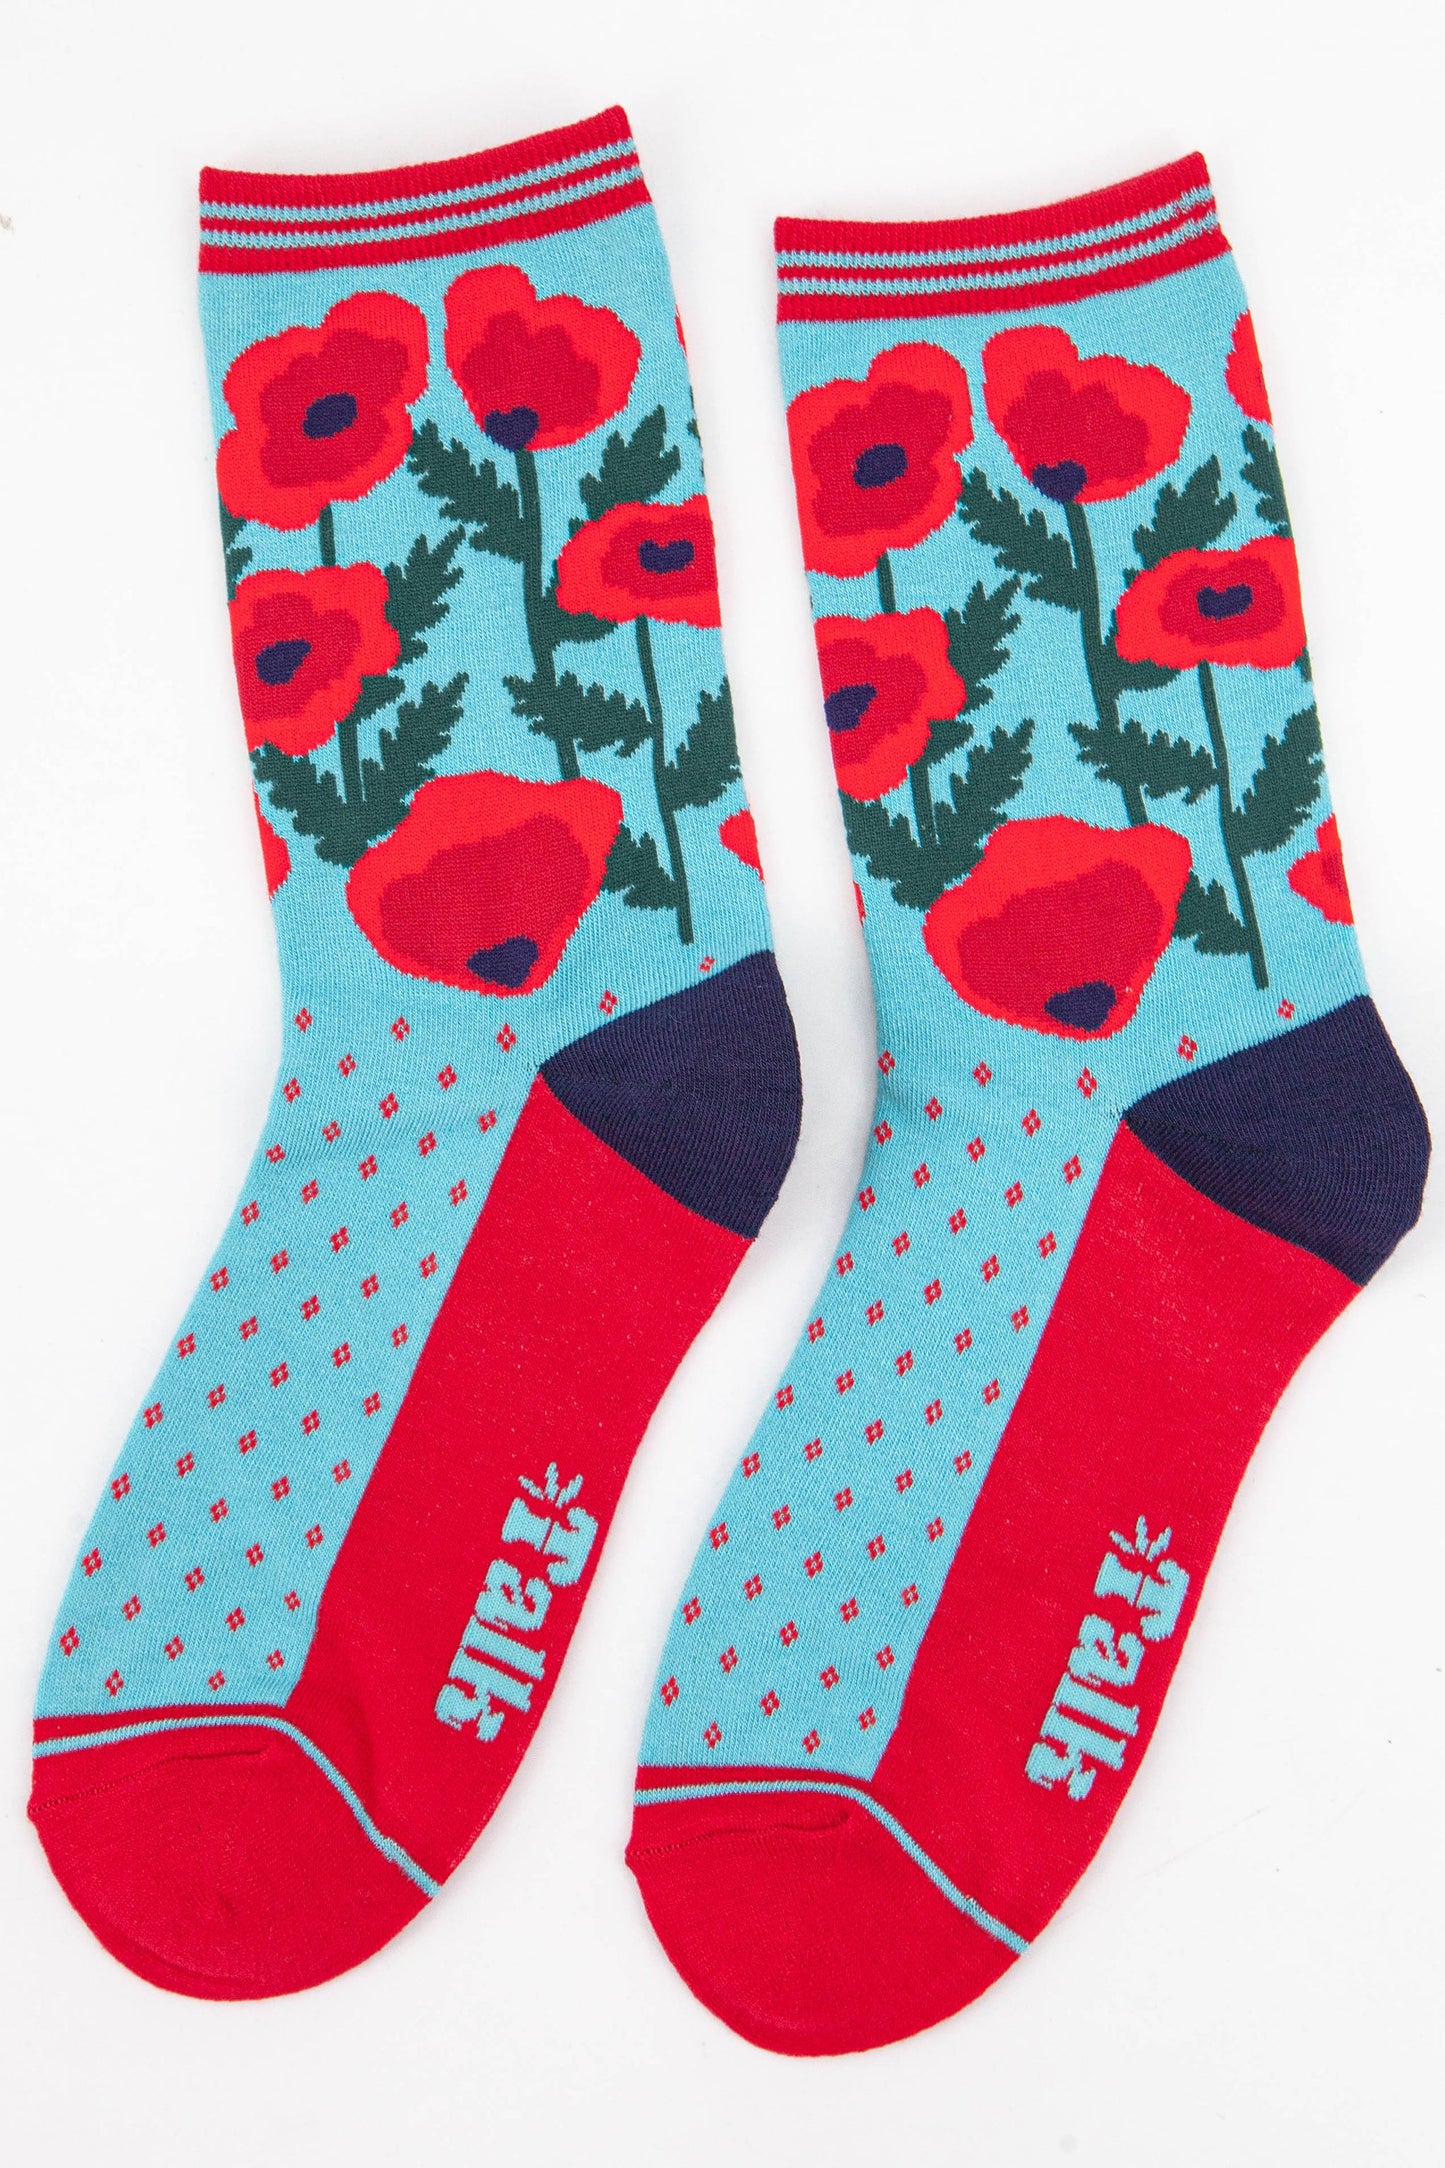 red and blue ankle socks with poppy flowers and a striped cuff